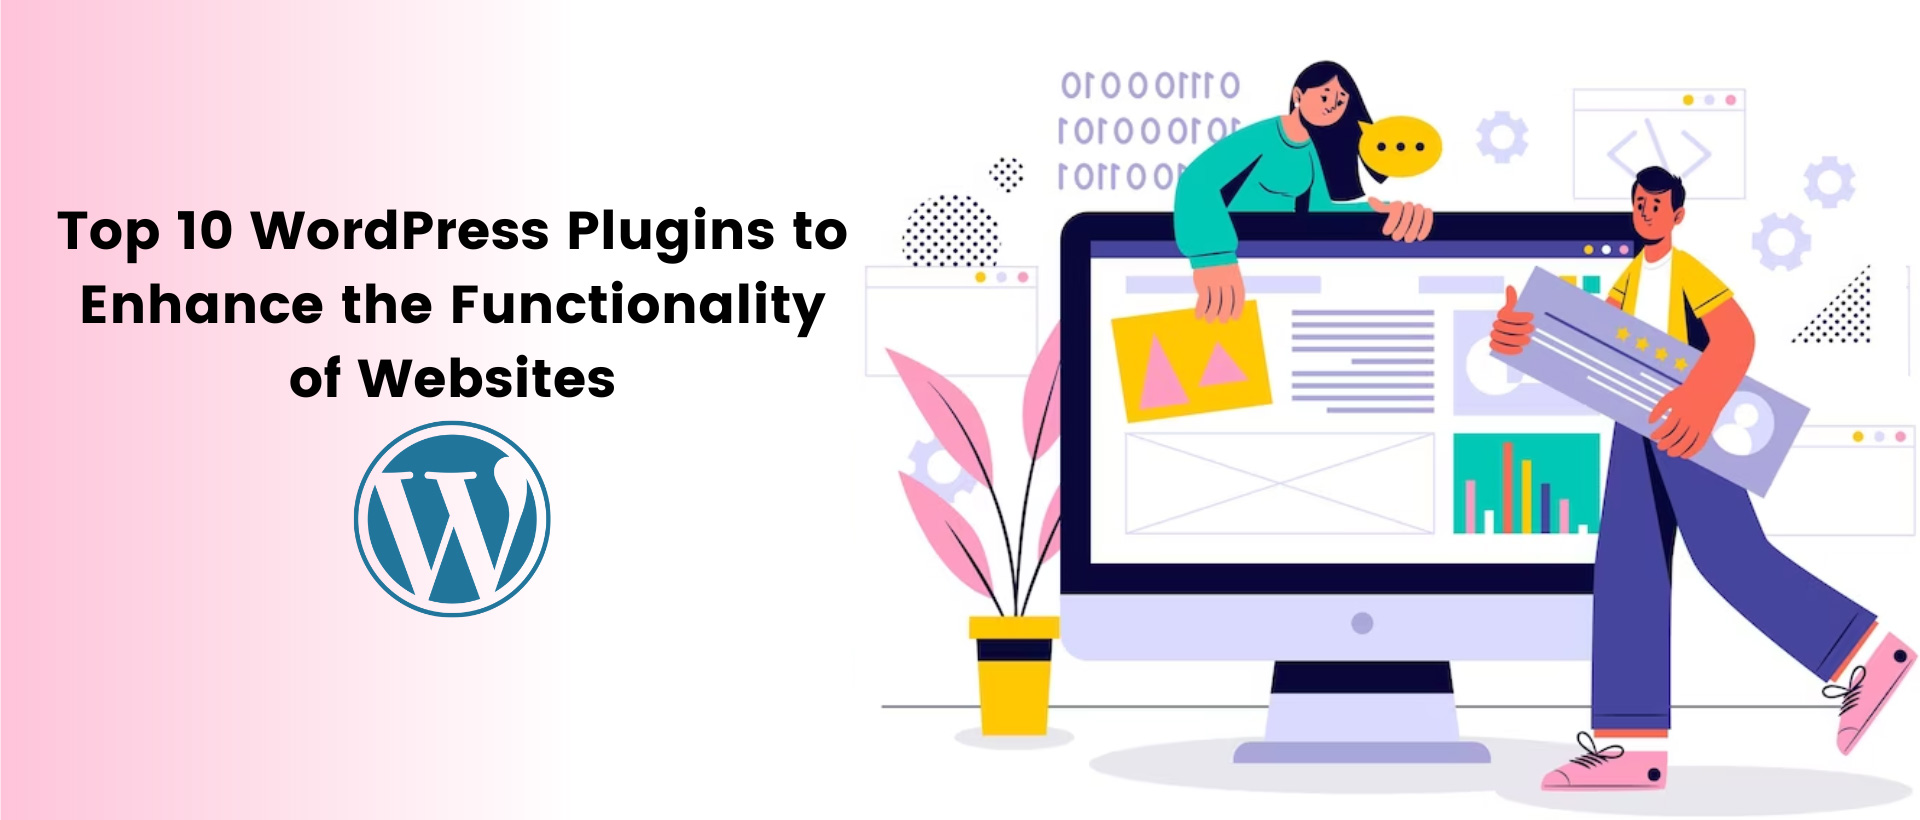 Top 10 WordPress Plugins to Enhance the Functionality of Websites